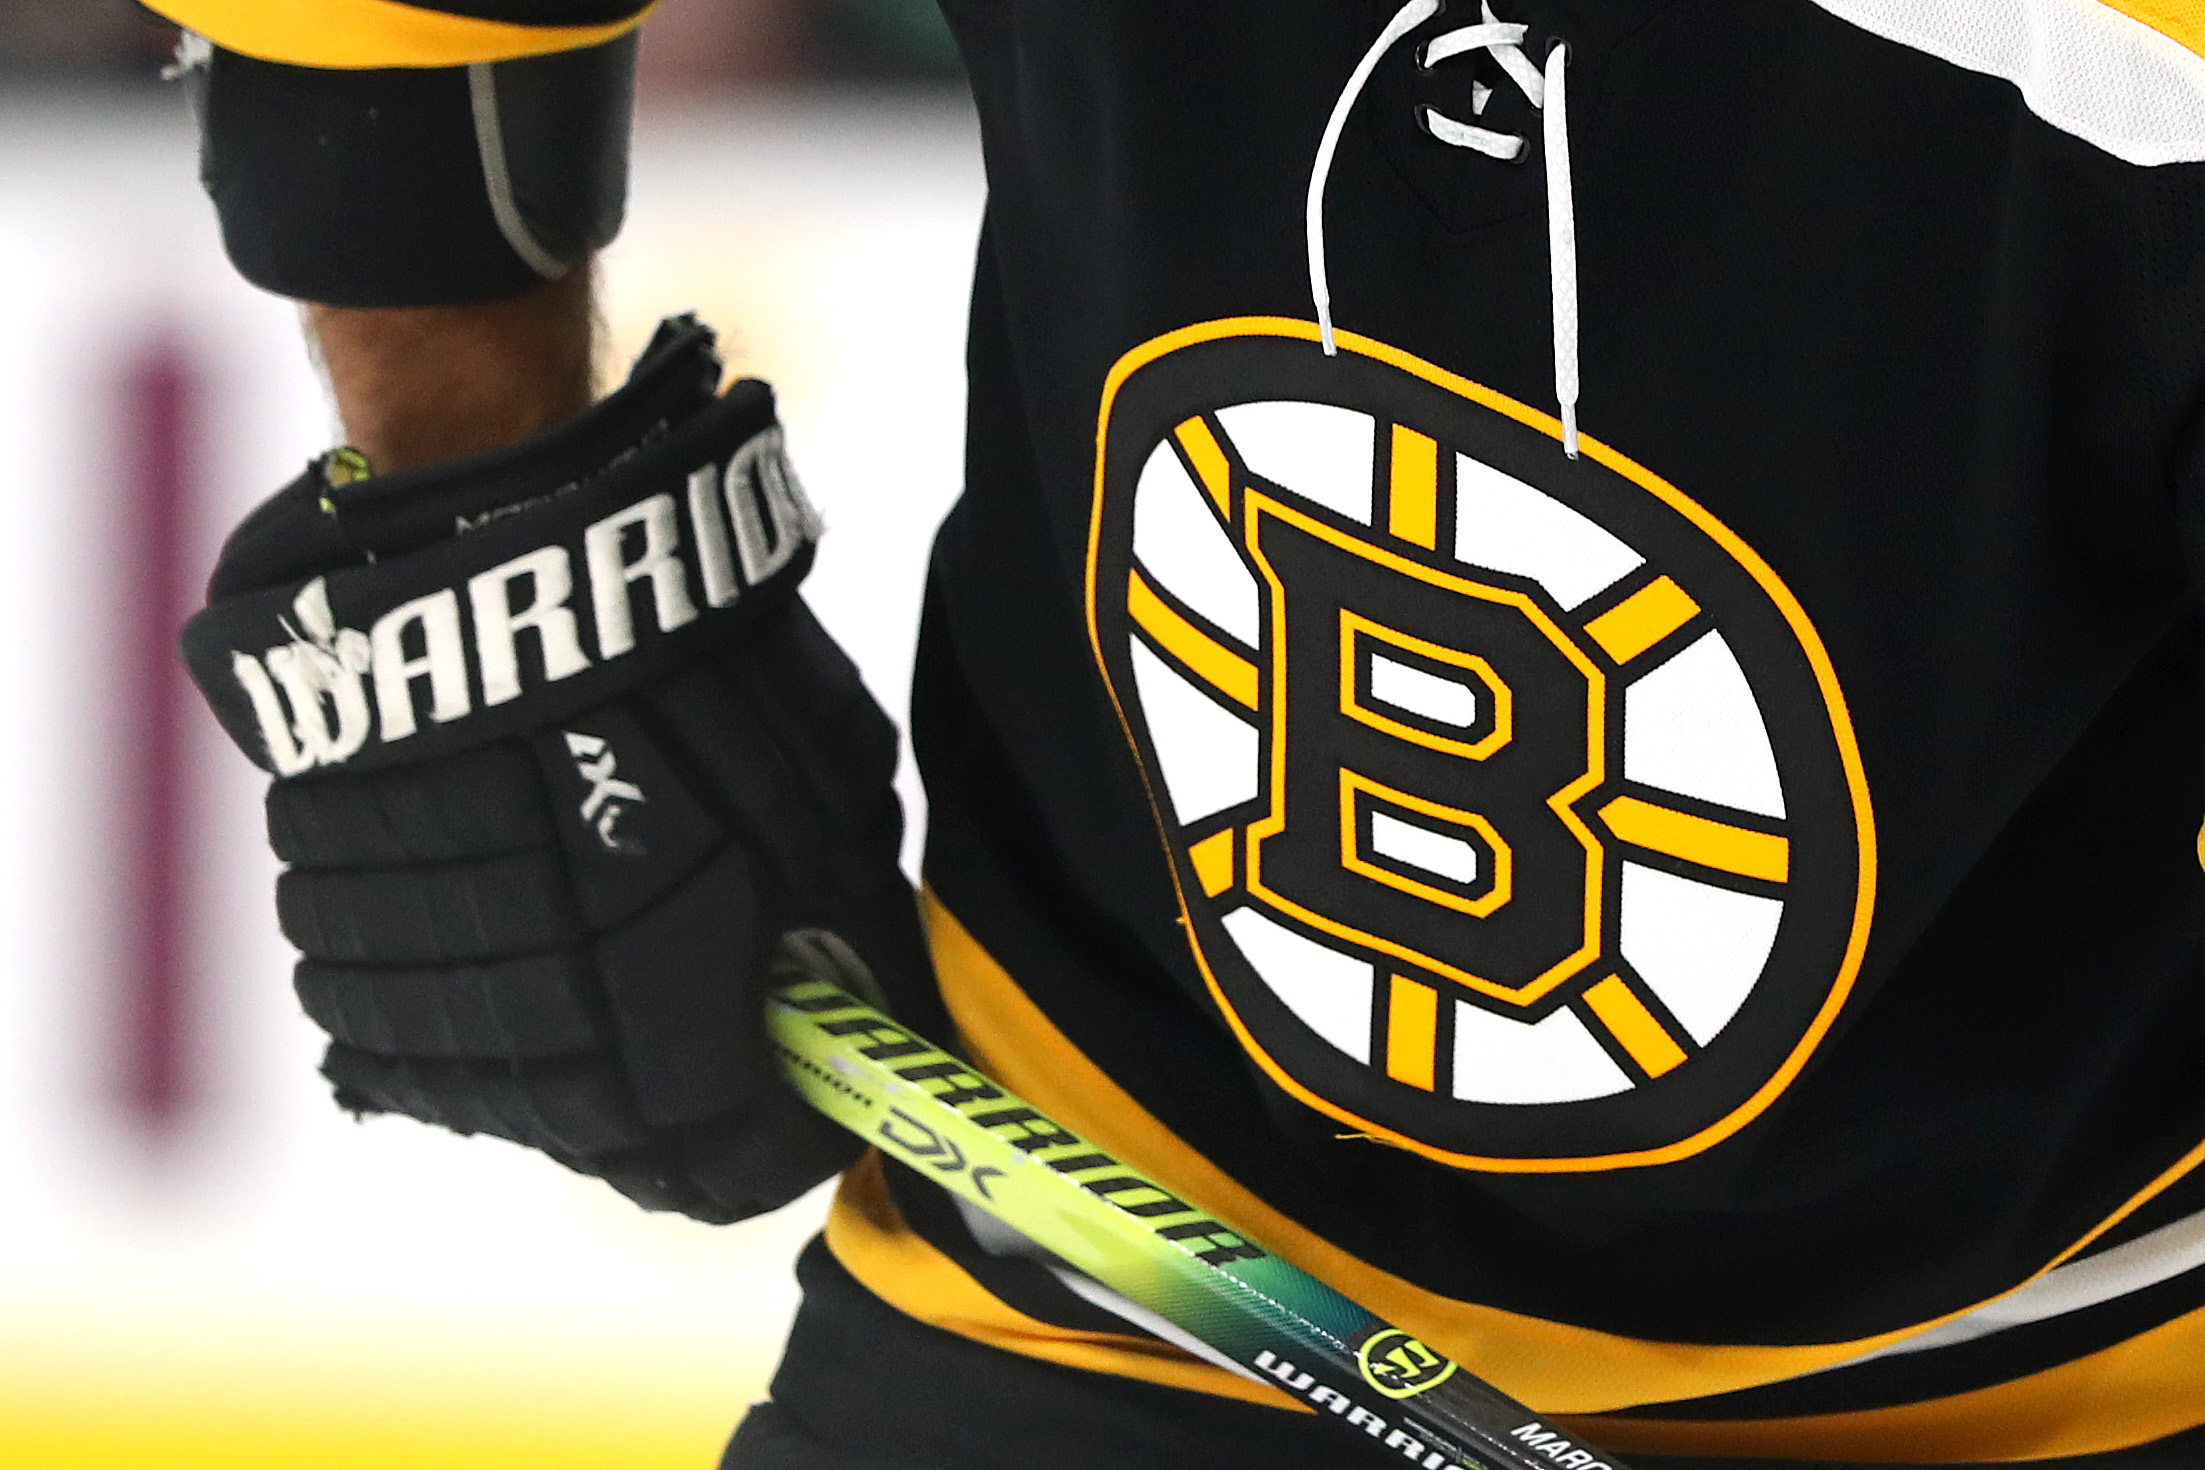 BOSTON, MASSACHUSETTS - SEPTEMBER 23: A detail of the Bruins logo on the sweater of Brad Marchand #63 of the Boston Bruins during the first period of the preseason game between the Philadelphia Flyers and the Boston Bruins at TD Garden on September 23, 2019 in Boston, Massachusetts. (Photo by Maddie Meyer/Getty Images)